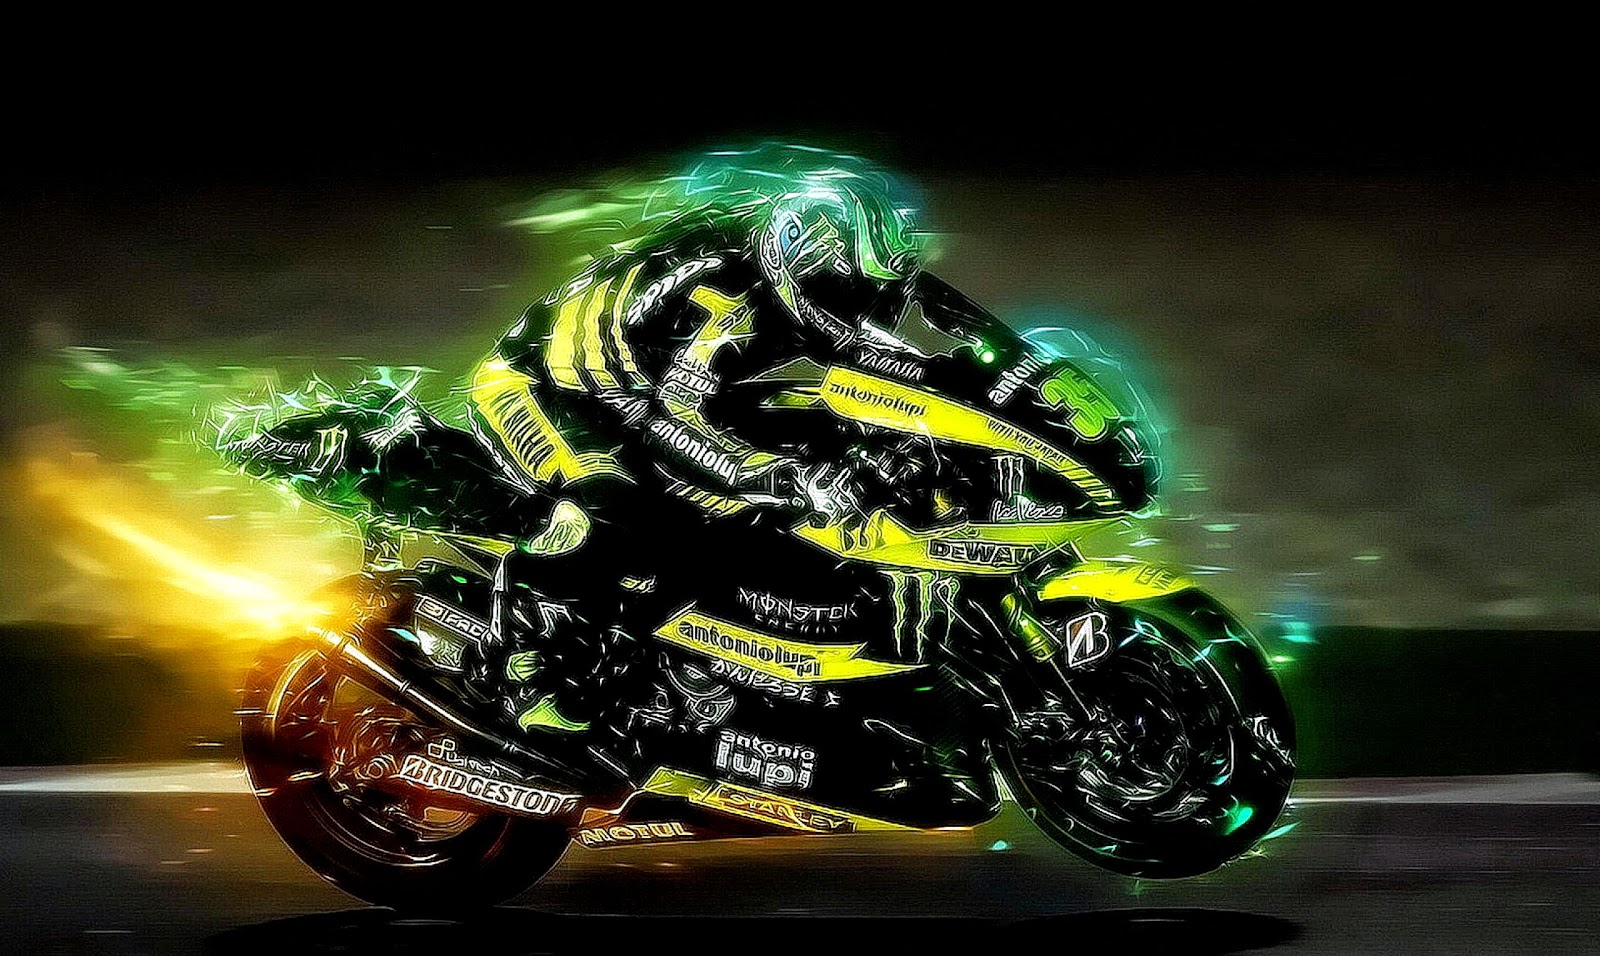 Motorcycle Wallpapers   Full HD wallpaper search